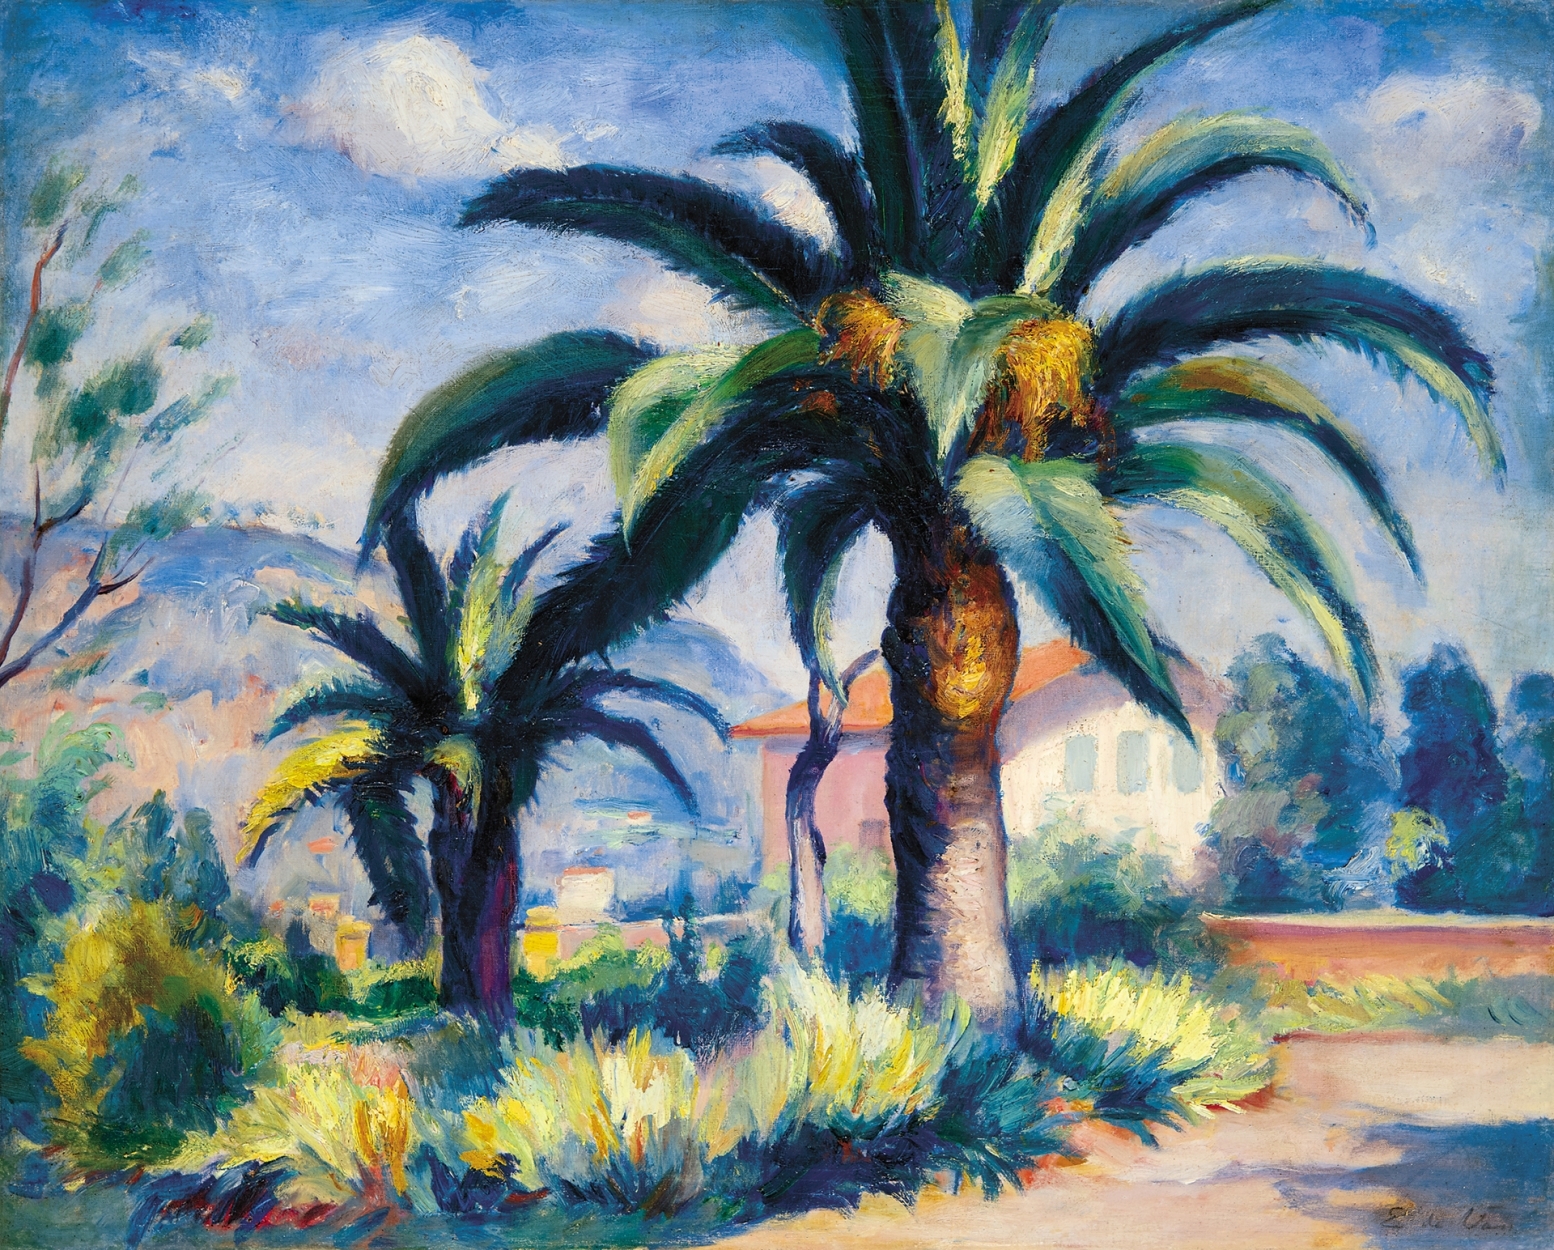 Vass Elemér (1887-1957) View of South France with Palm Trees